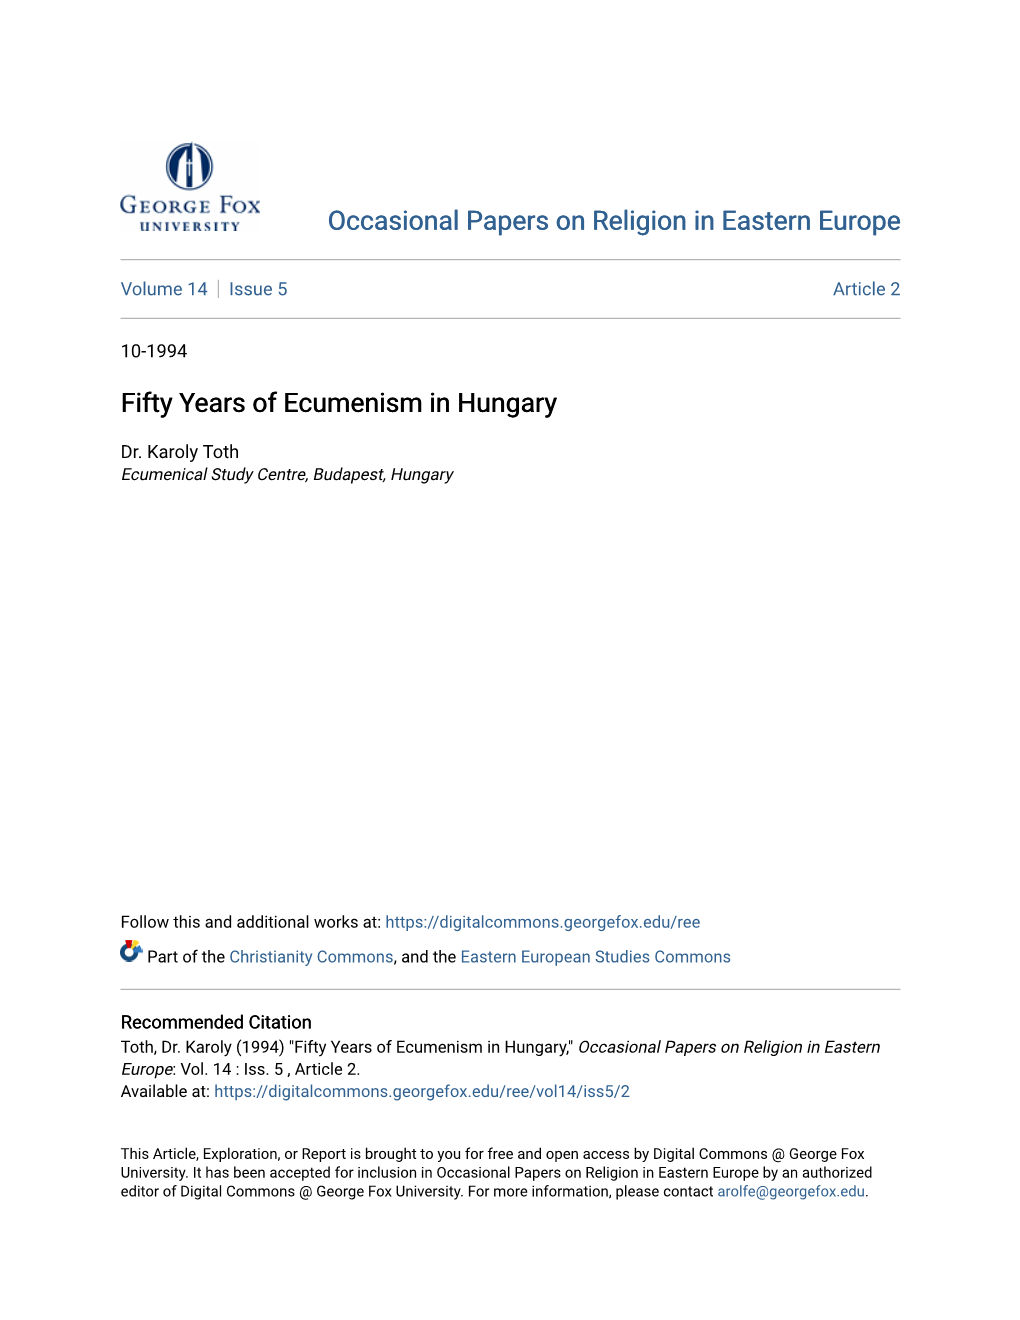 Fifty Years of Ecumenism in Hungary